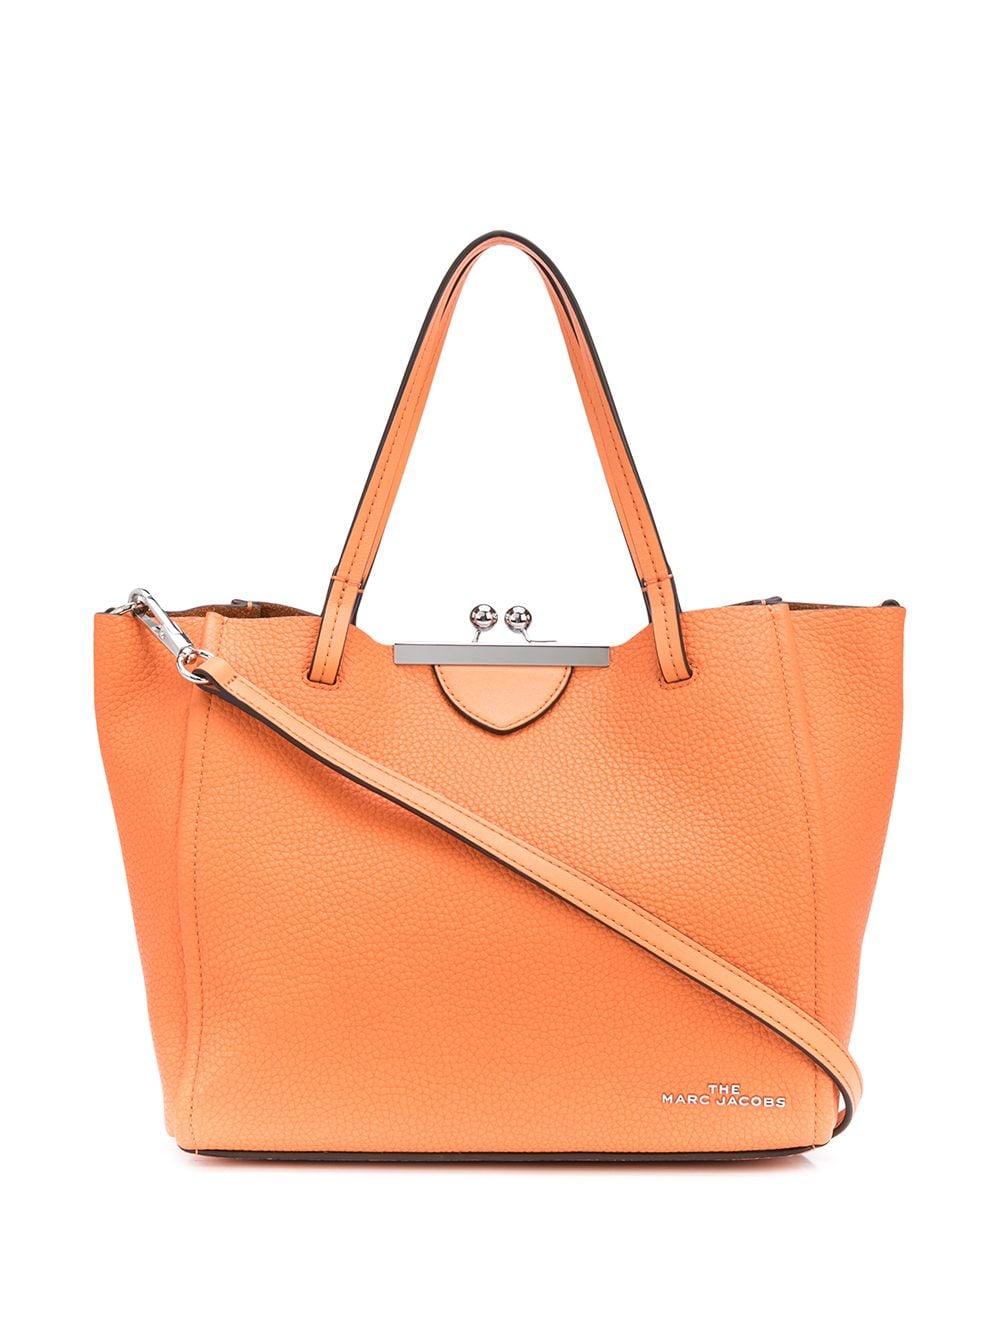 Marc Jacobs Leather The Kiss Lock Mini Tote Bag in Orange - Lyst